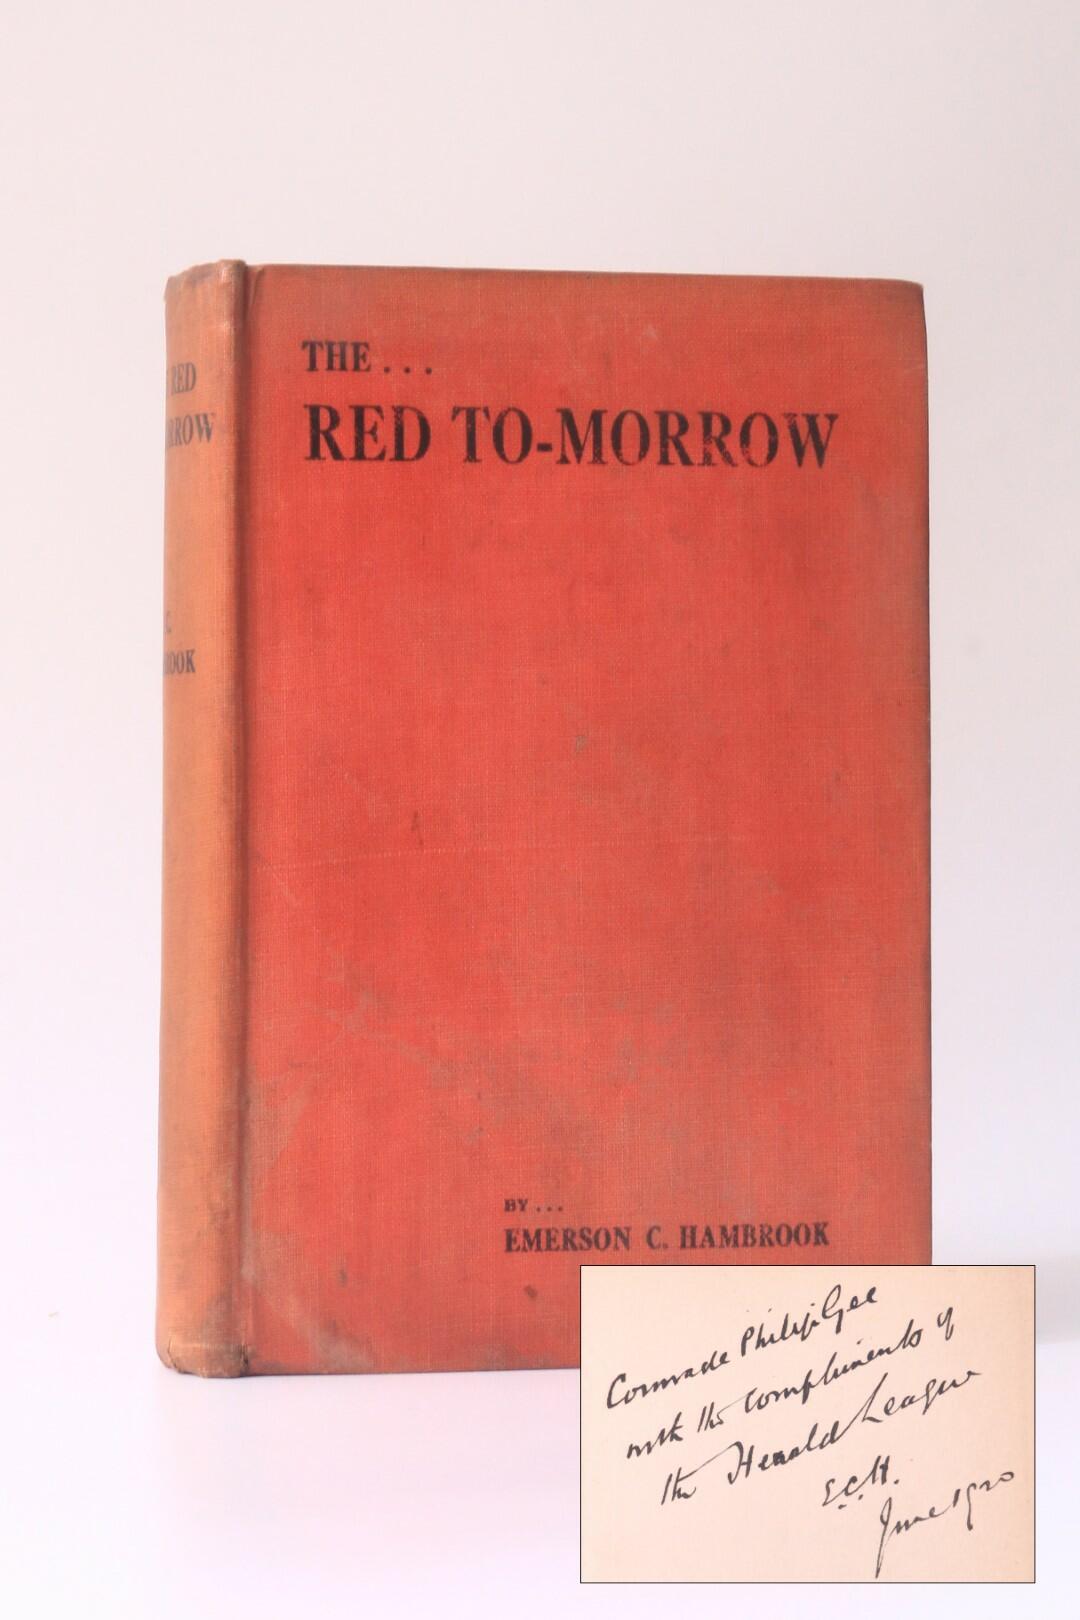 Emerson C. Hambrook - The?Red To-Morrow - The Proletarian Press, 1920, Signed First Edition.